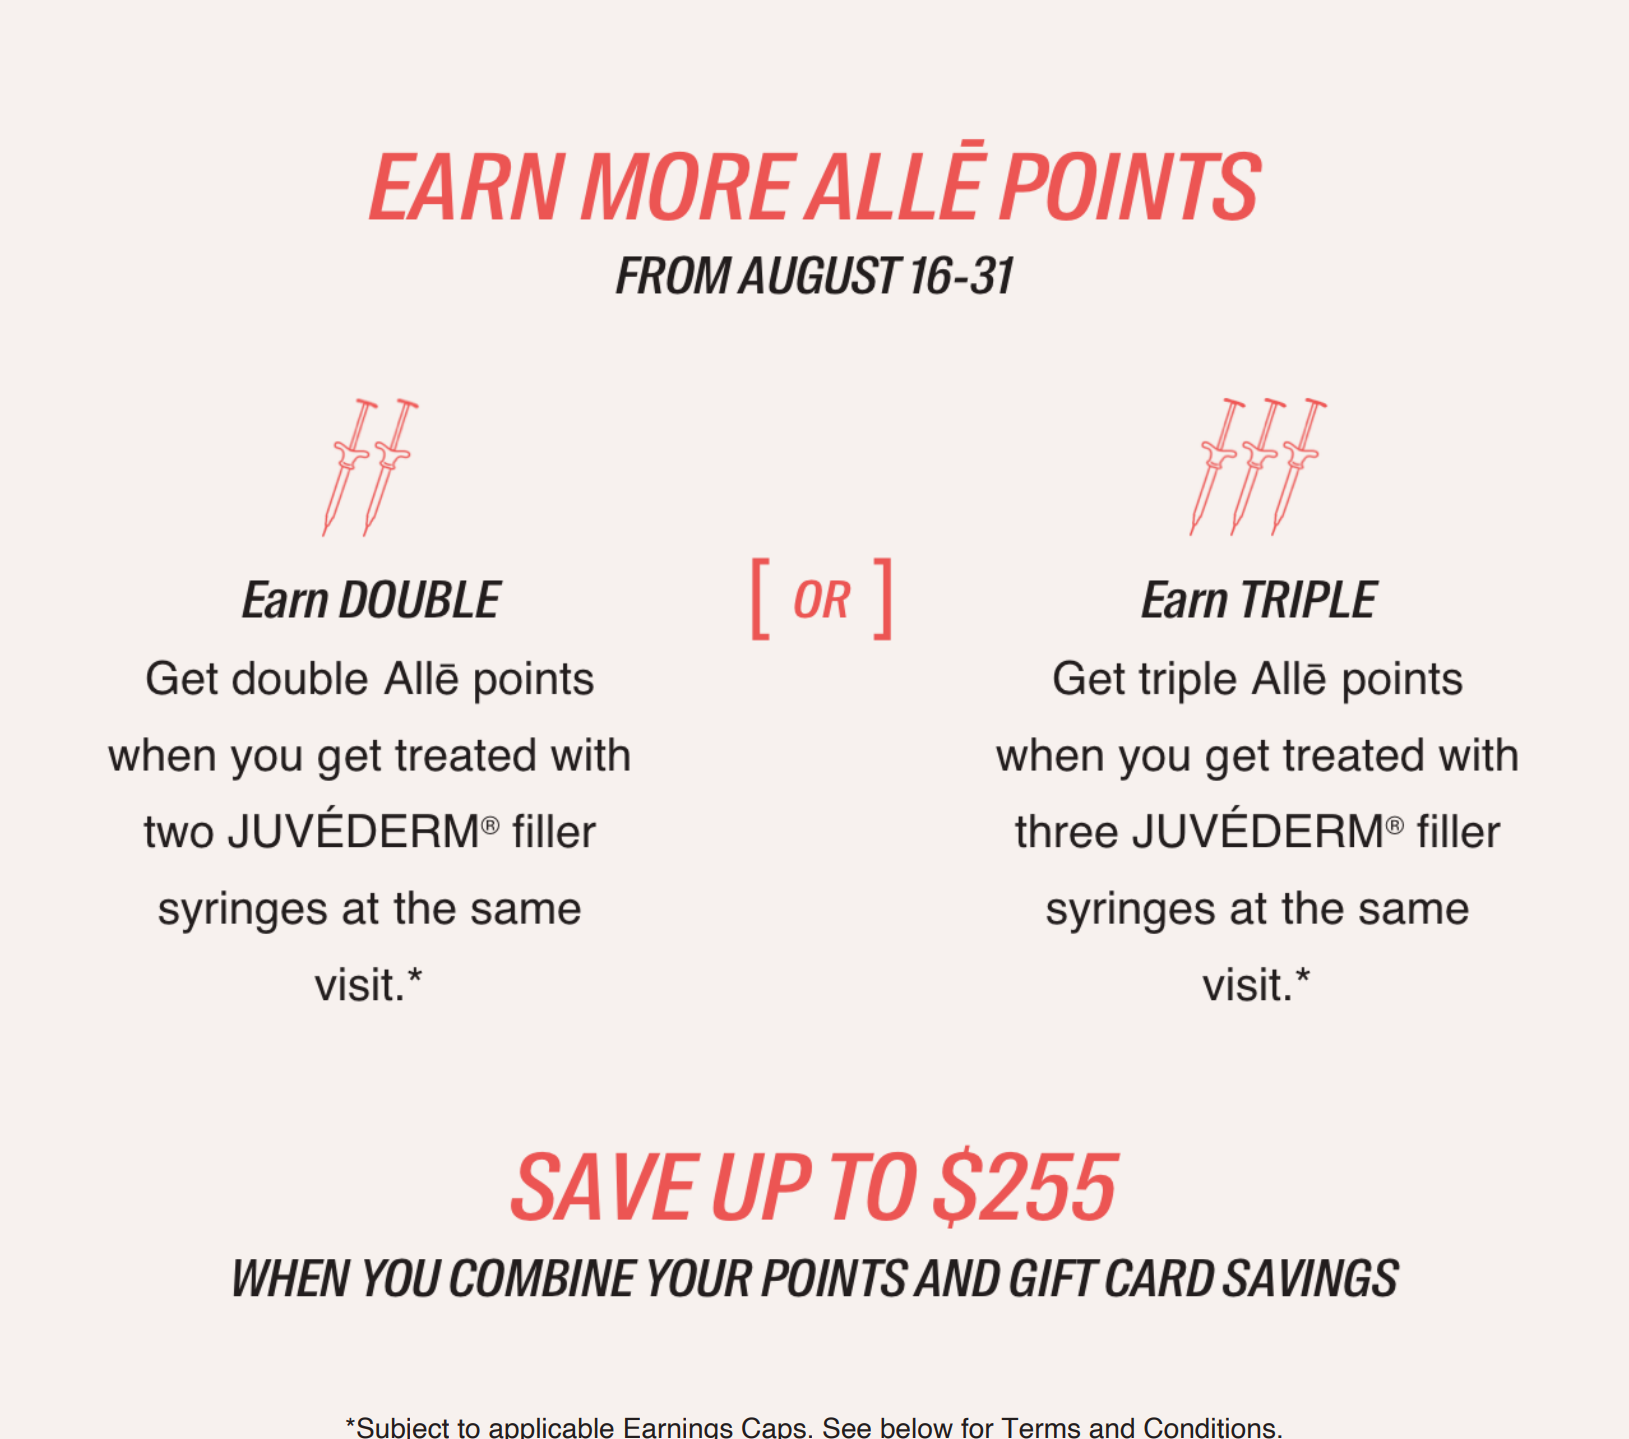 DSC August 16 2023 Juvederm Day how to earn up to triple Alle points infographic with the text "Earn More Alle Points, From August 16 -31" at the top. "earn double get double Alle points when you get treated with two Juvederm filler syringes at the same visit" or "earn triple get triple Alle points when you get treated with three Juvederm filler syringes at the same visit"